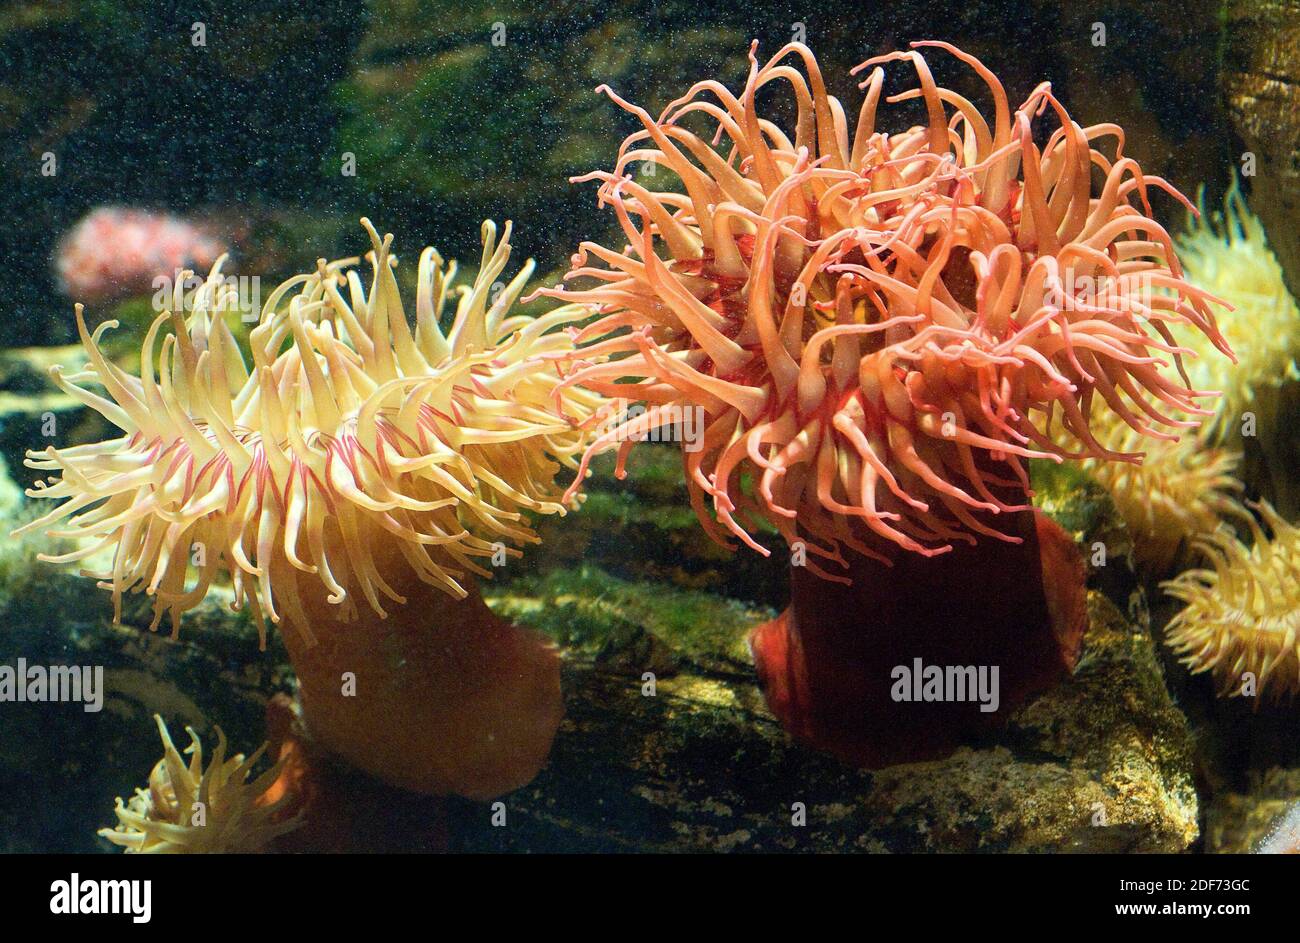 Fish-eating anemone (Urticina piscivora) is a sea anemone carnivorous that feeds of small fish. Stock Photo